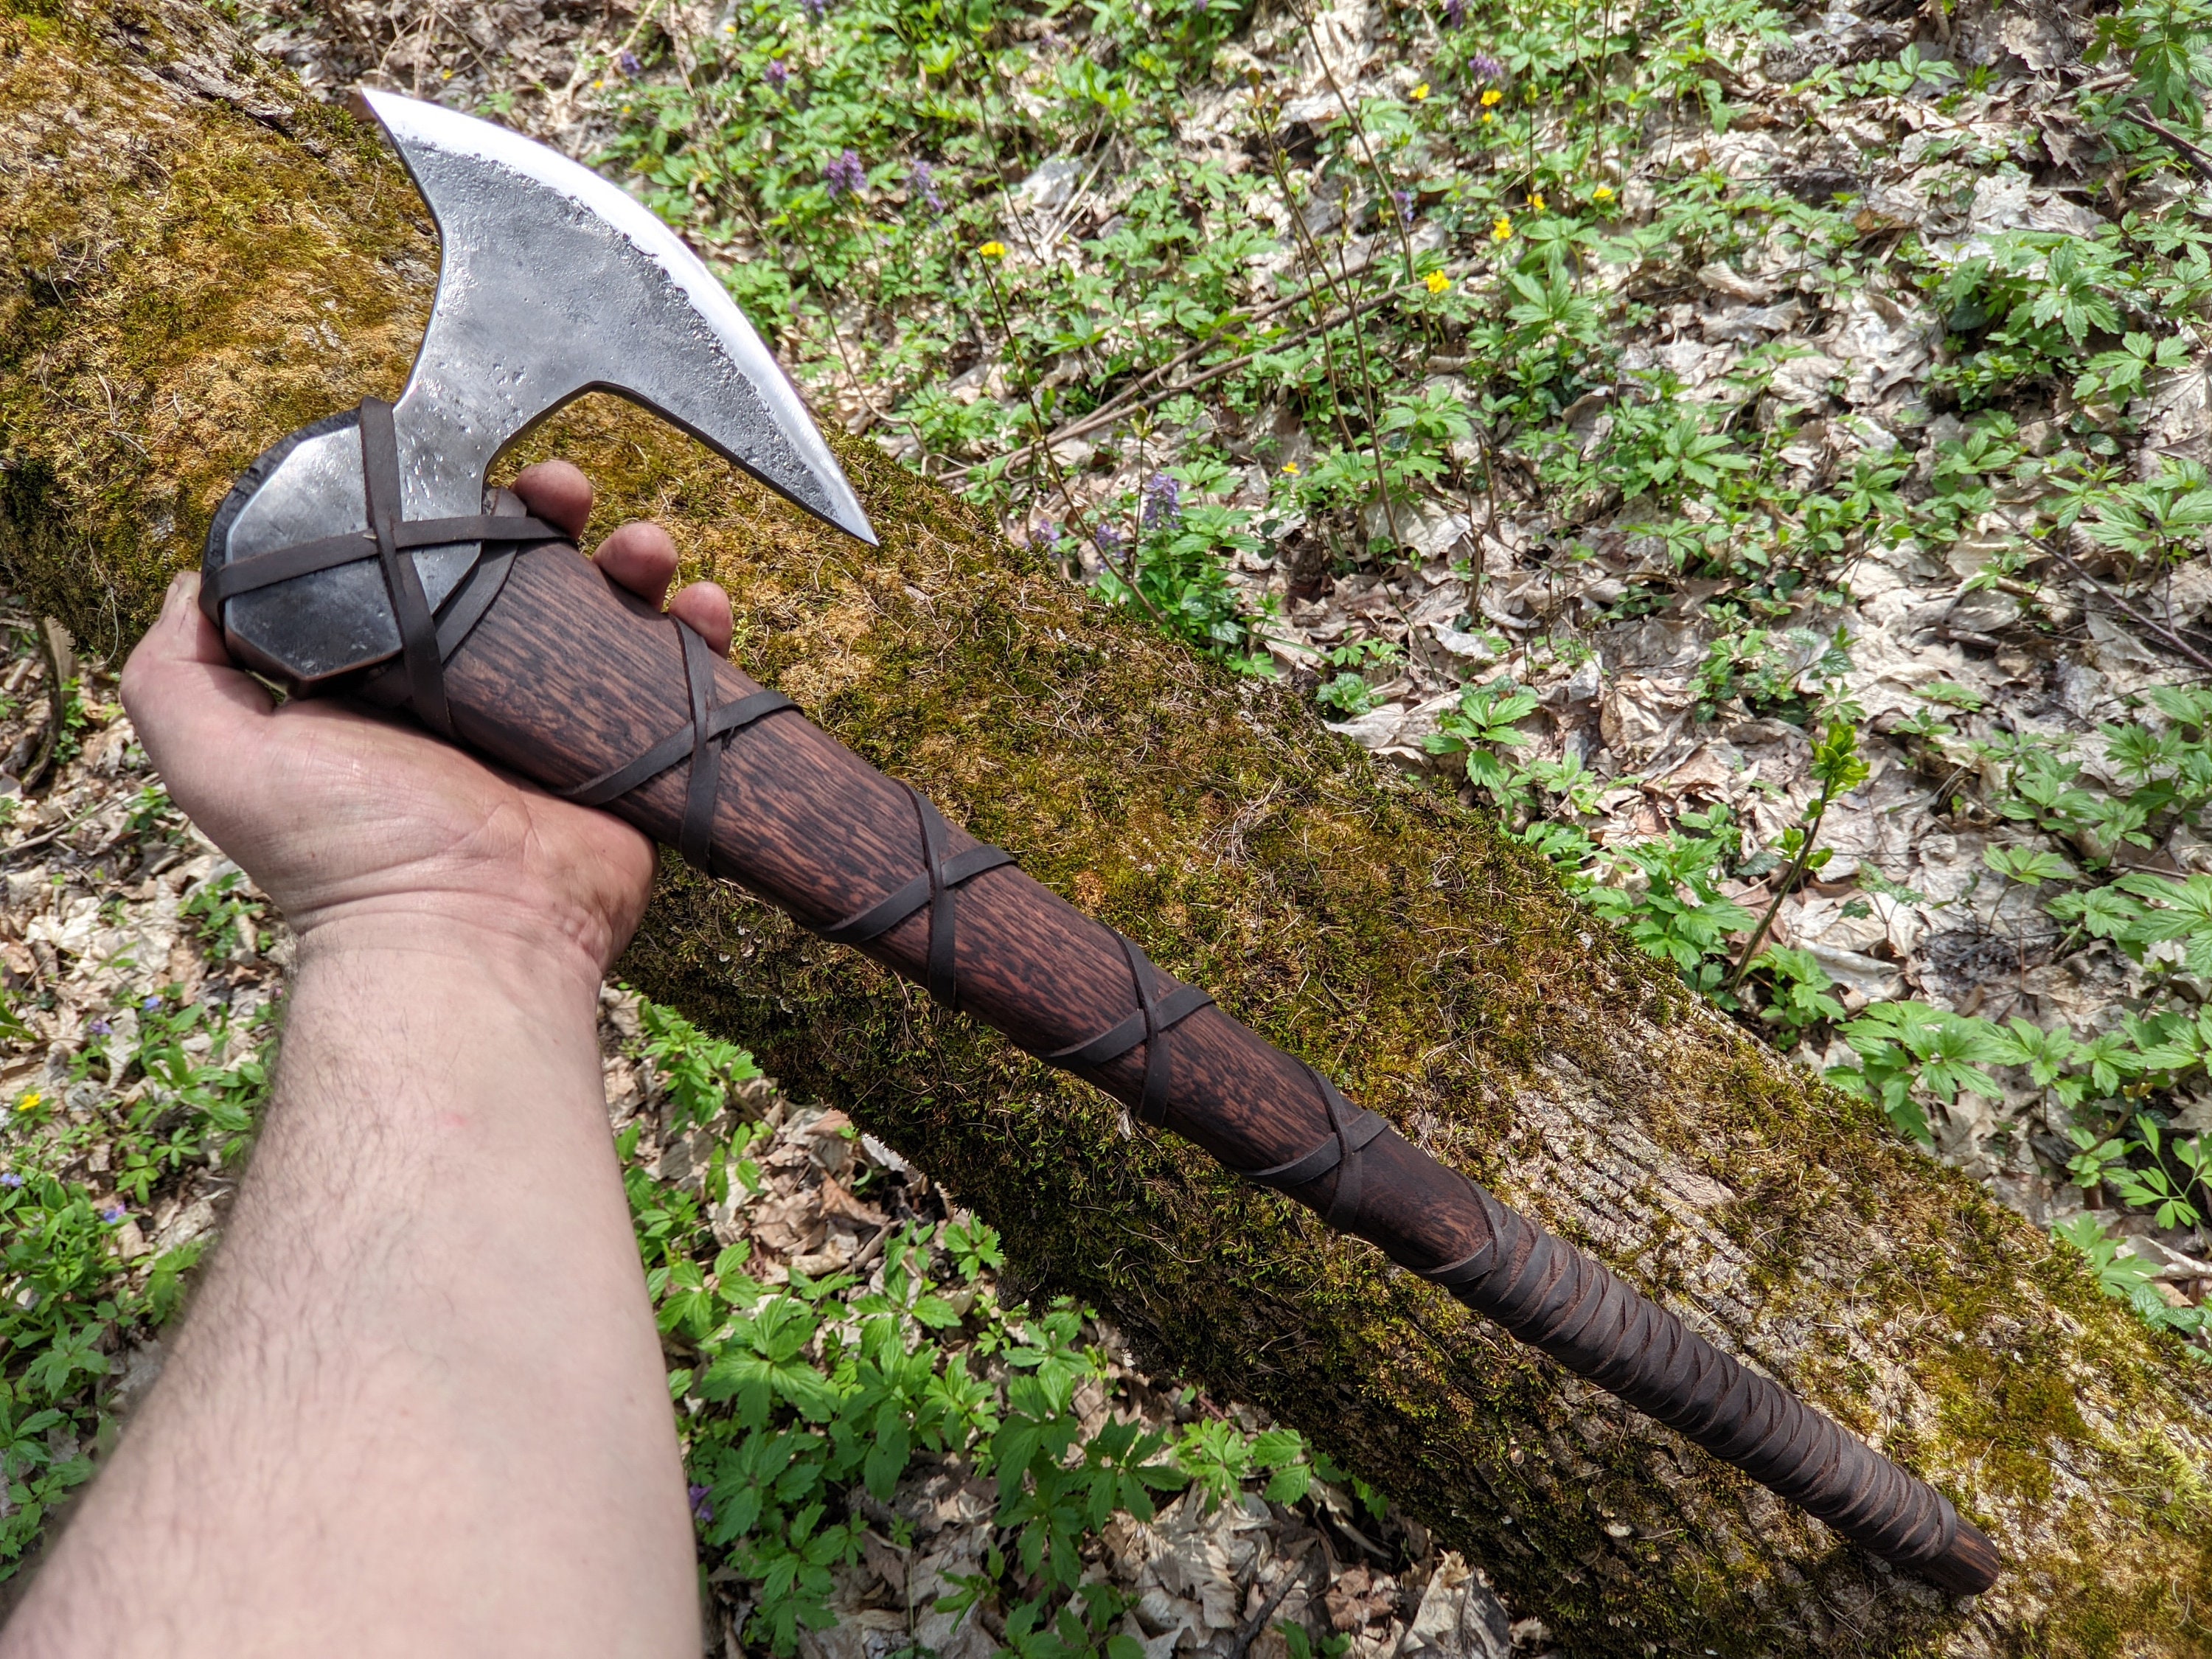 Axe of Ragnar, Viking Ax, Norse Axe, War Ax, Dane Ax, Forest Ax, Hiking Axe,  Forged Ax, Bushcraft, Medieval Stuff, Hunting Ax, Iron Gifts -  Israel